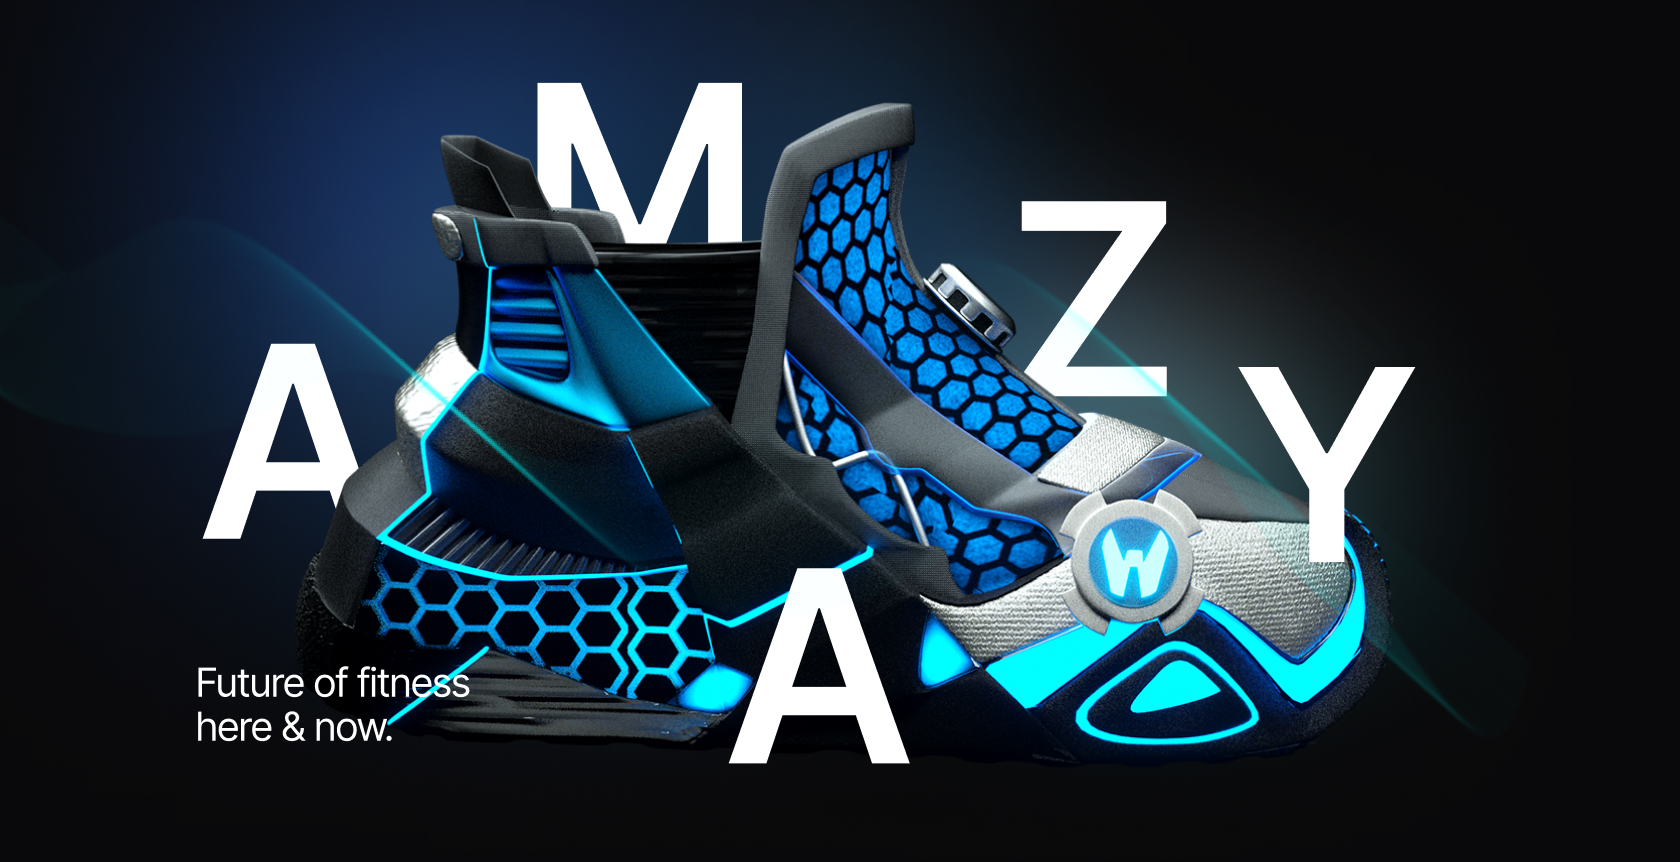 M2E Fitness App “AMAZY” Unleashes New NFT Sneakers